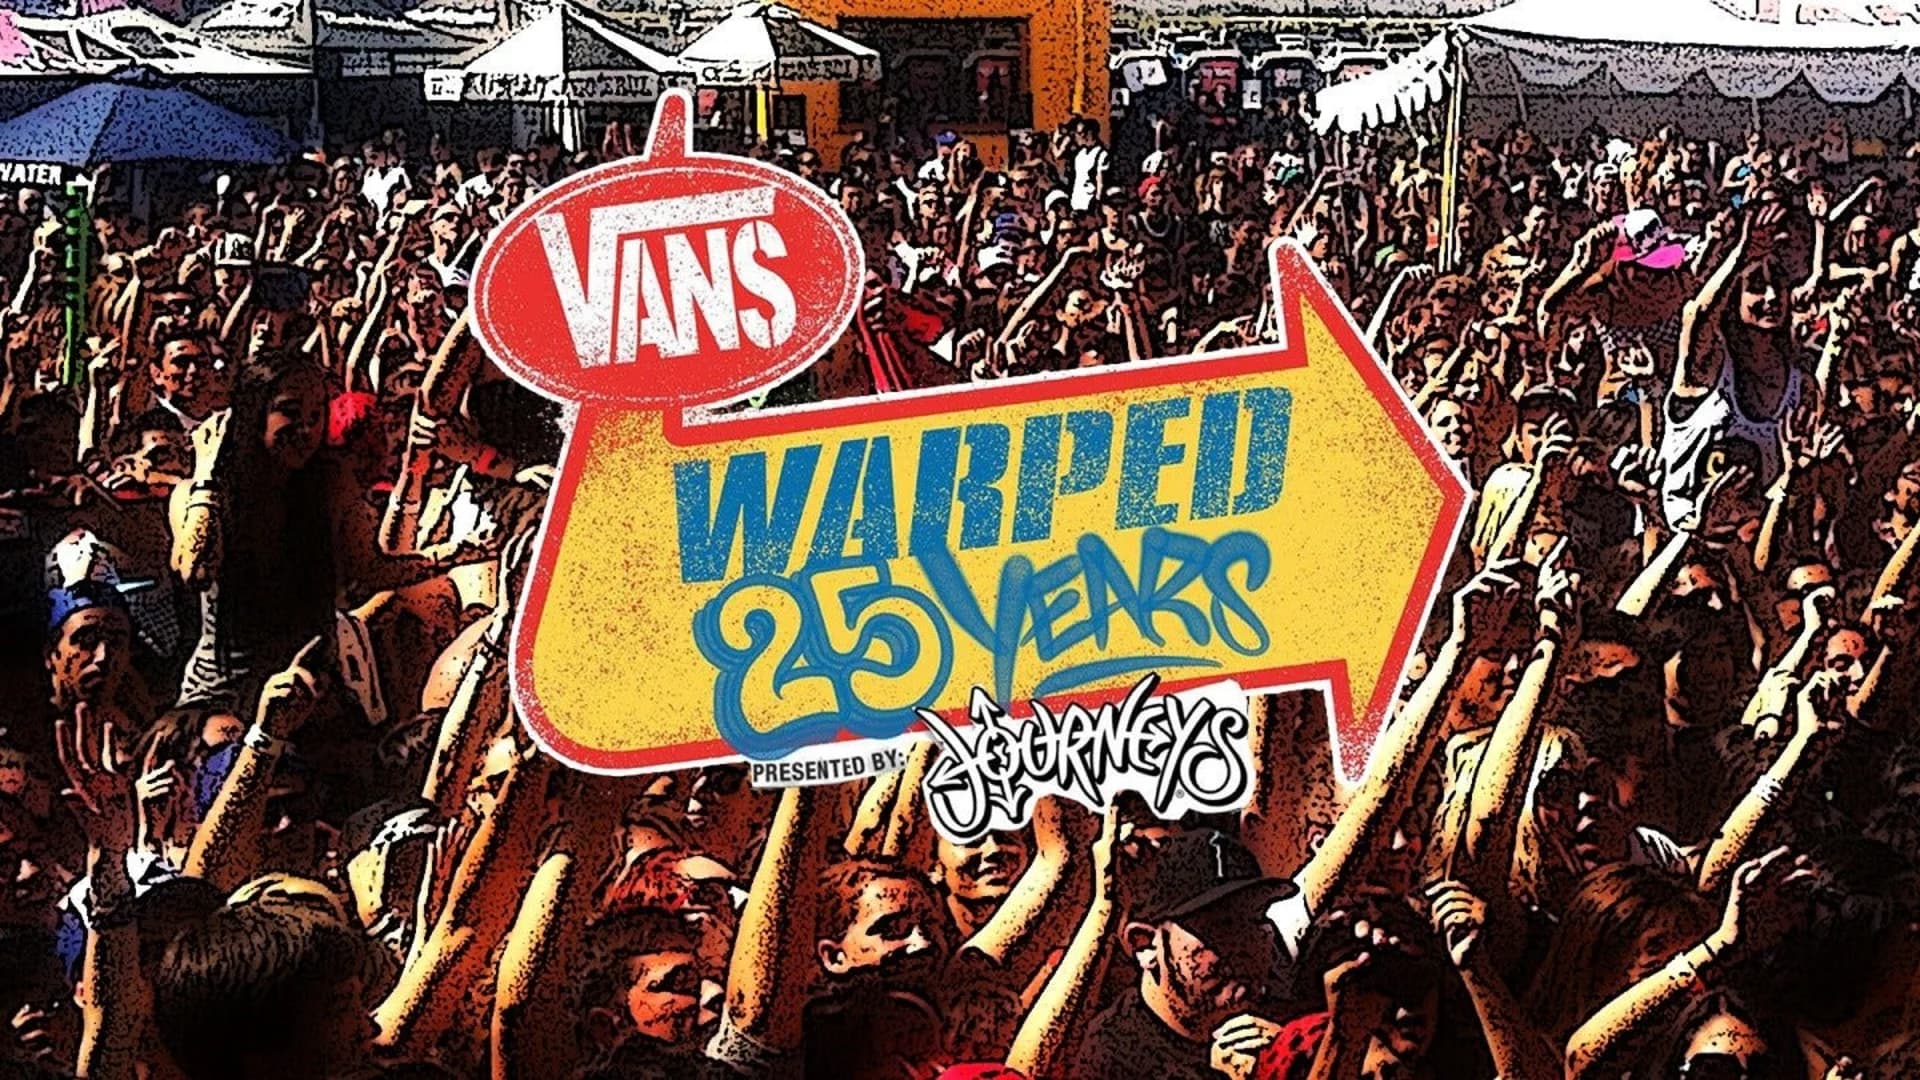 Rock on! Vans Warped Tour 25th anniversary tour coming to NJ